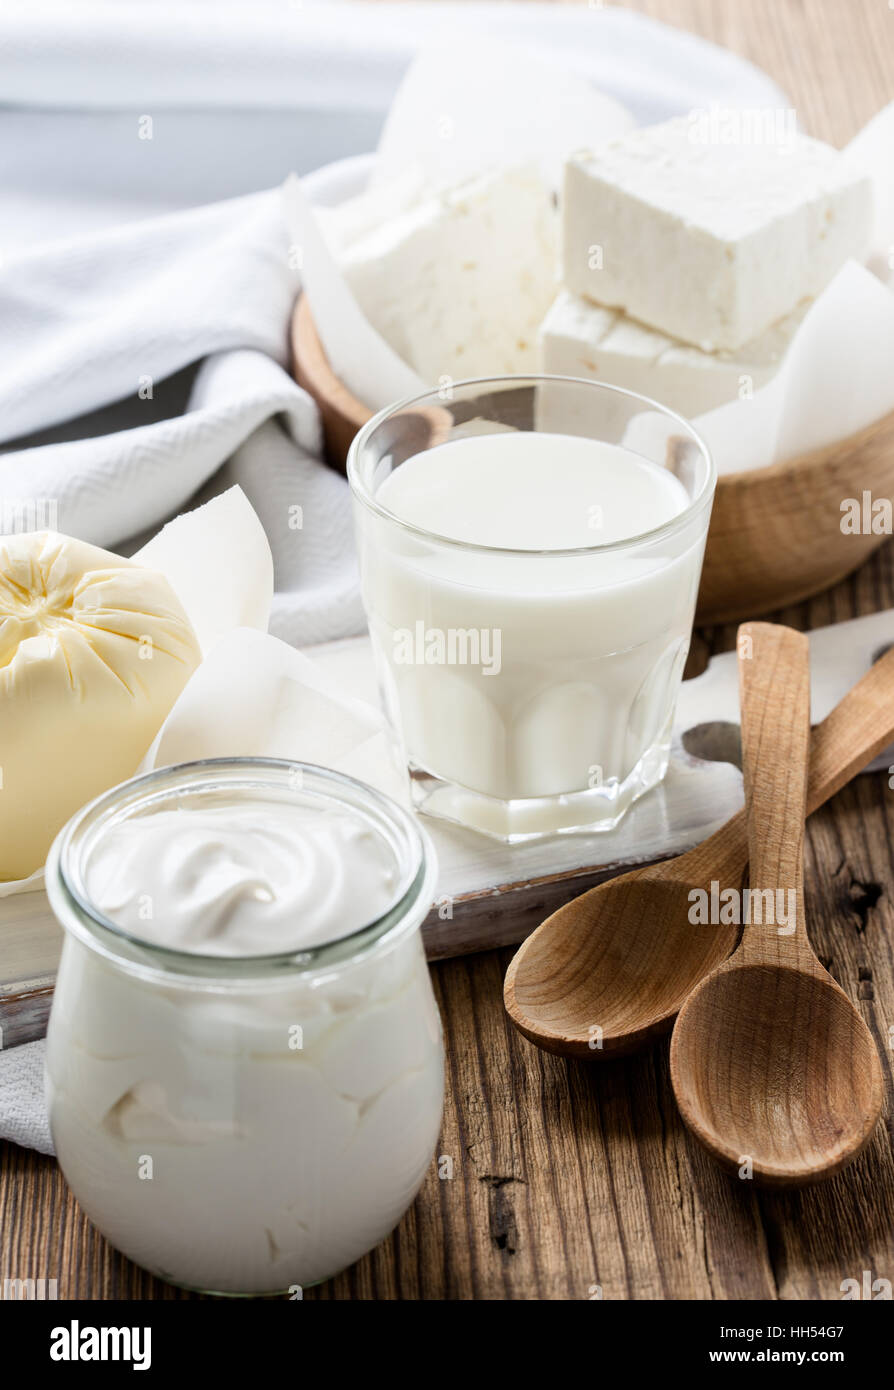 Organic dairy products on rustic wooden table. Cheese, milk, butter, sour cream Stock Photo